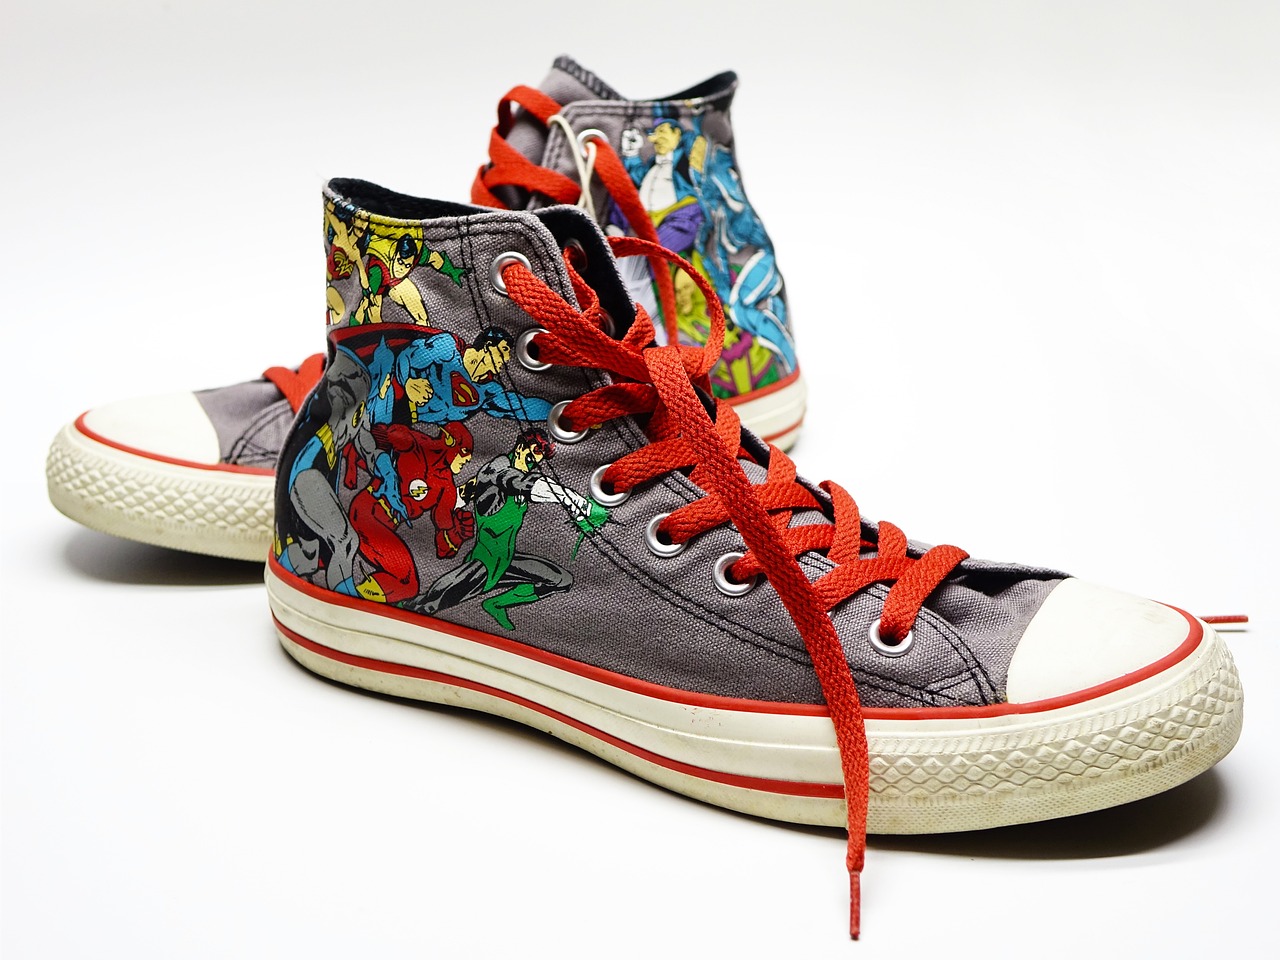 converse decorated with classic superheroes